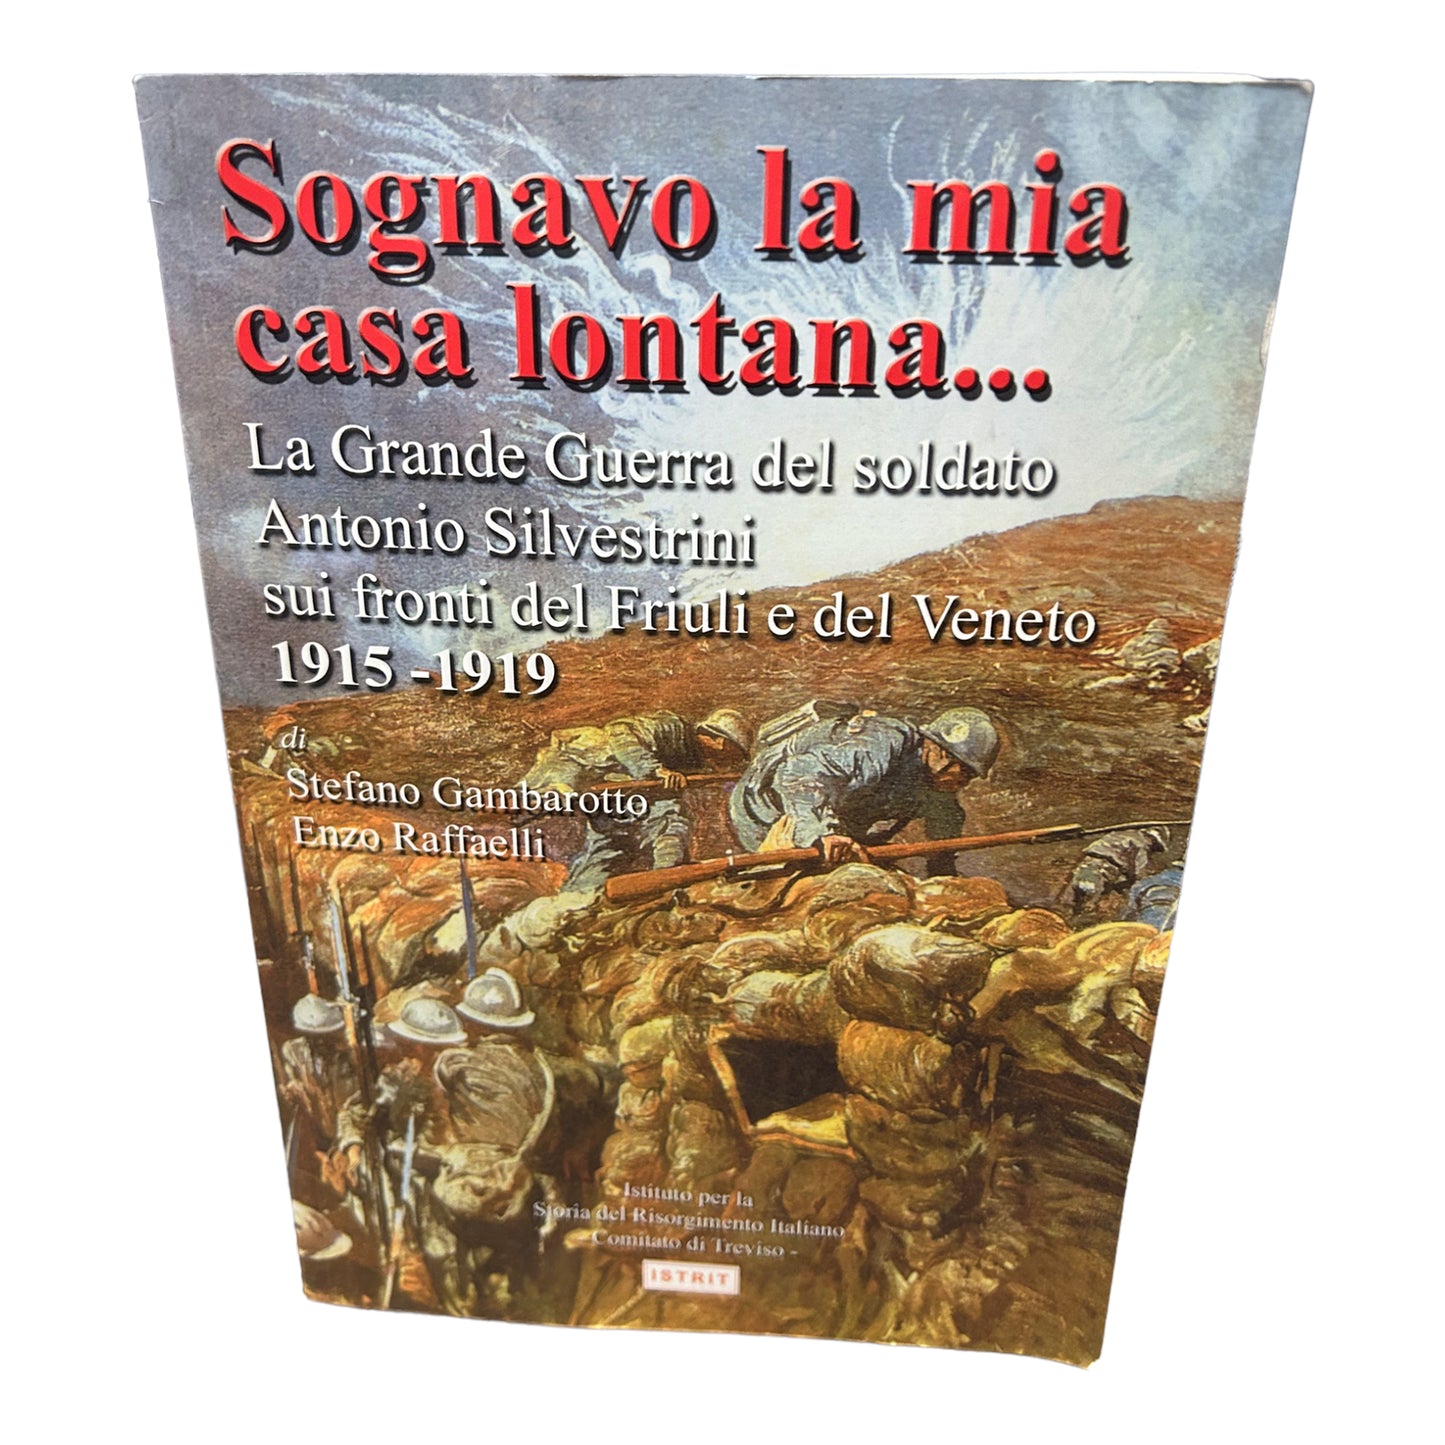 I dreamed of my distant home. The Great War of the soldier Antonio Silvestrini